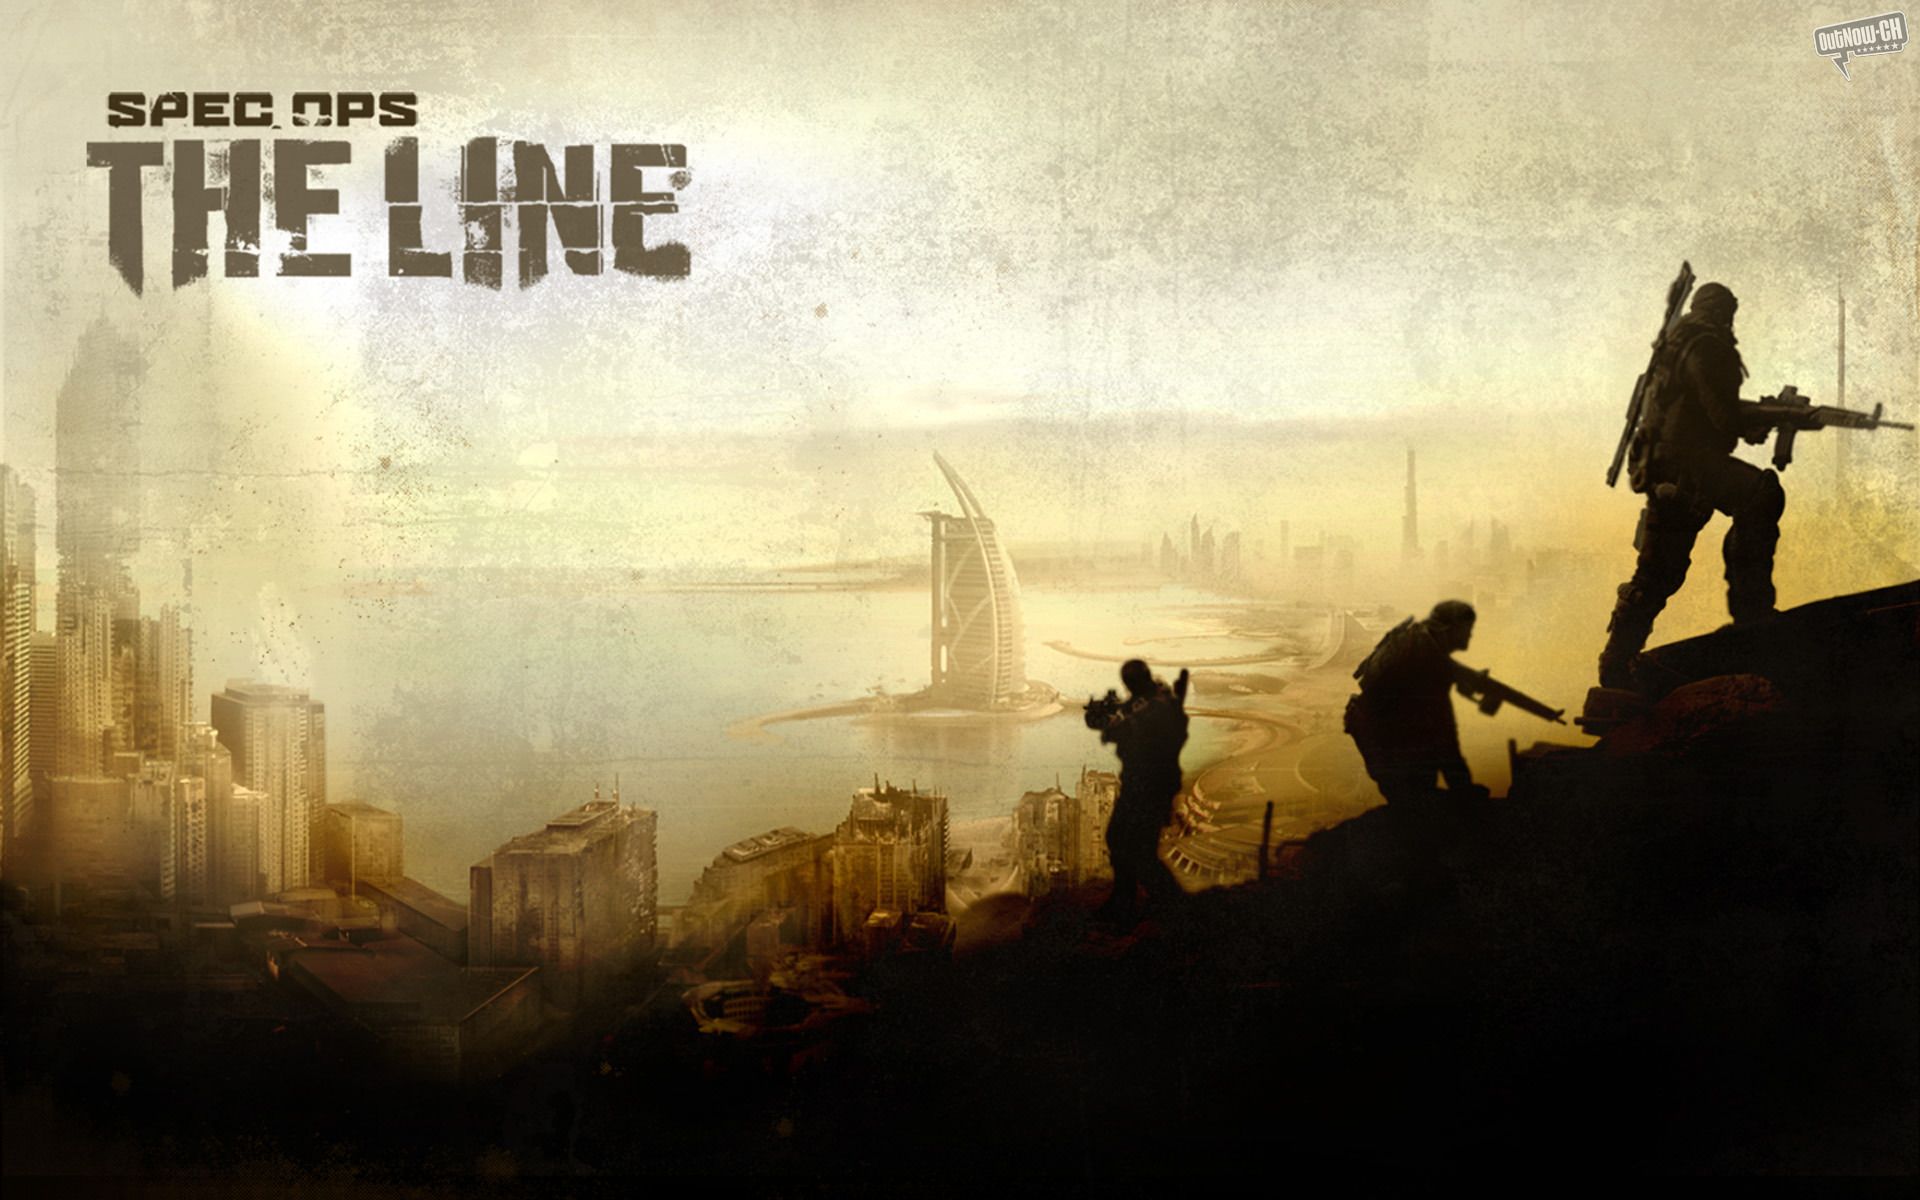 Spec Ops: The Line Wallpaper Wrap-Up | Rebel Gaming